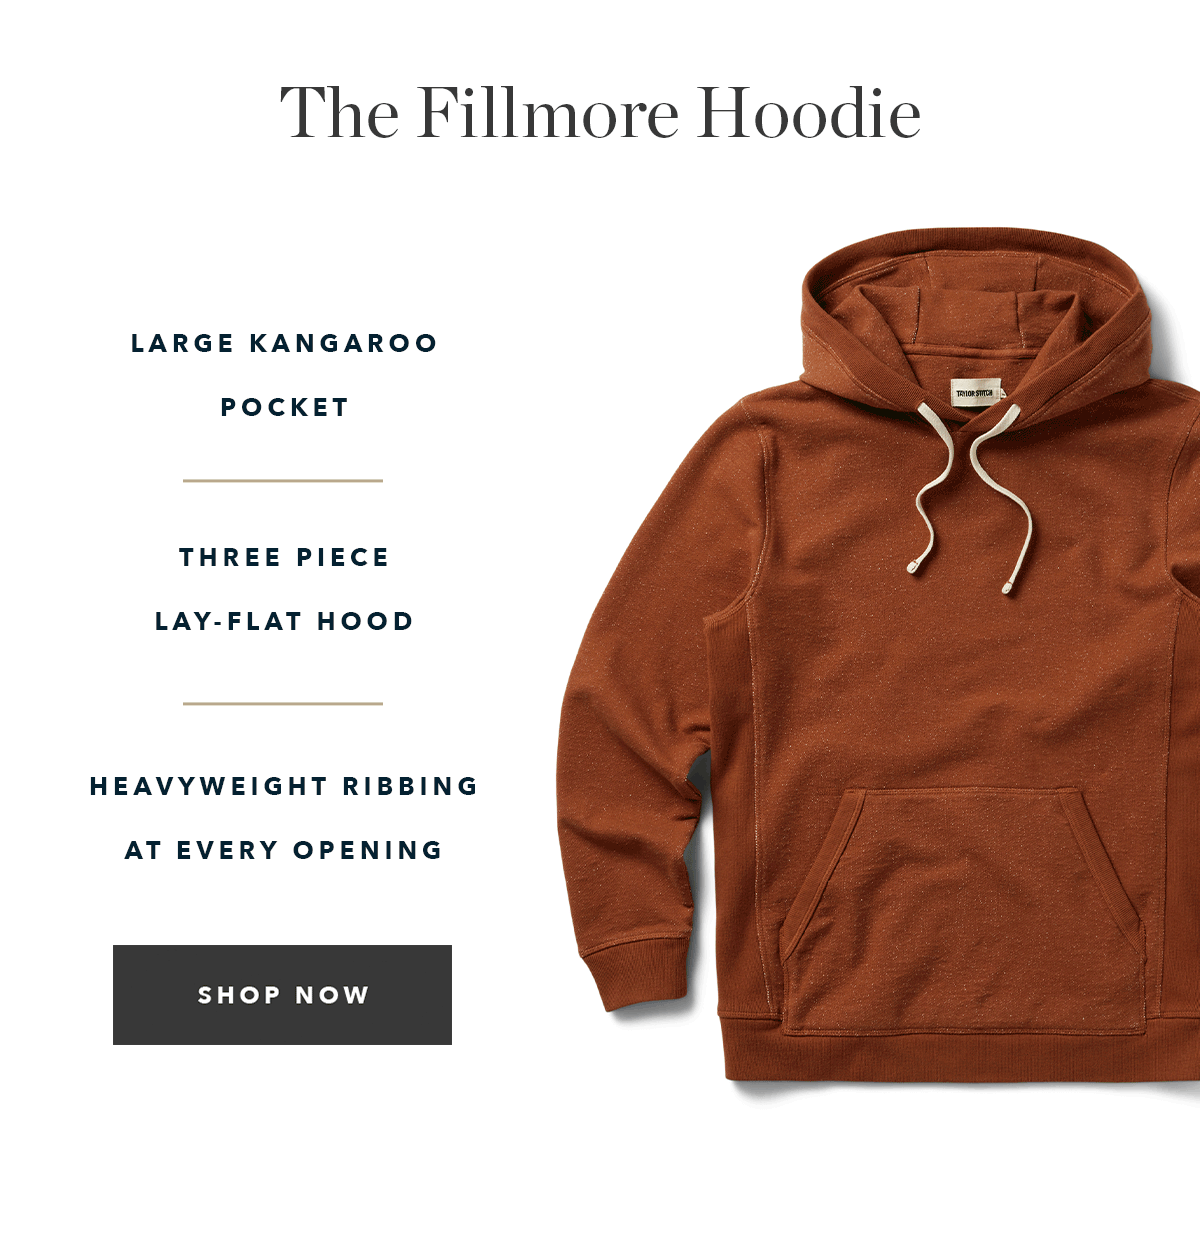 The Fillmore Hoodie